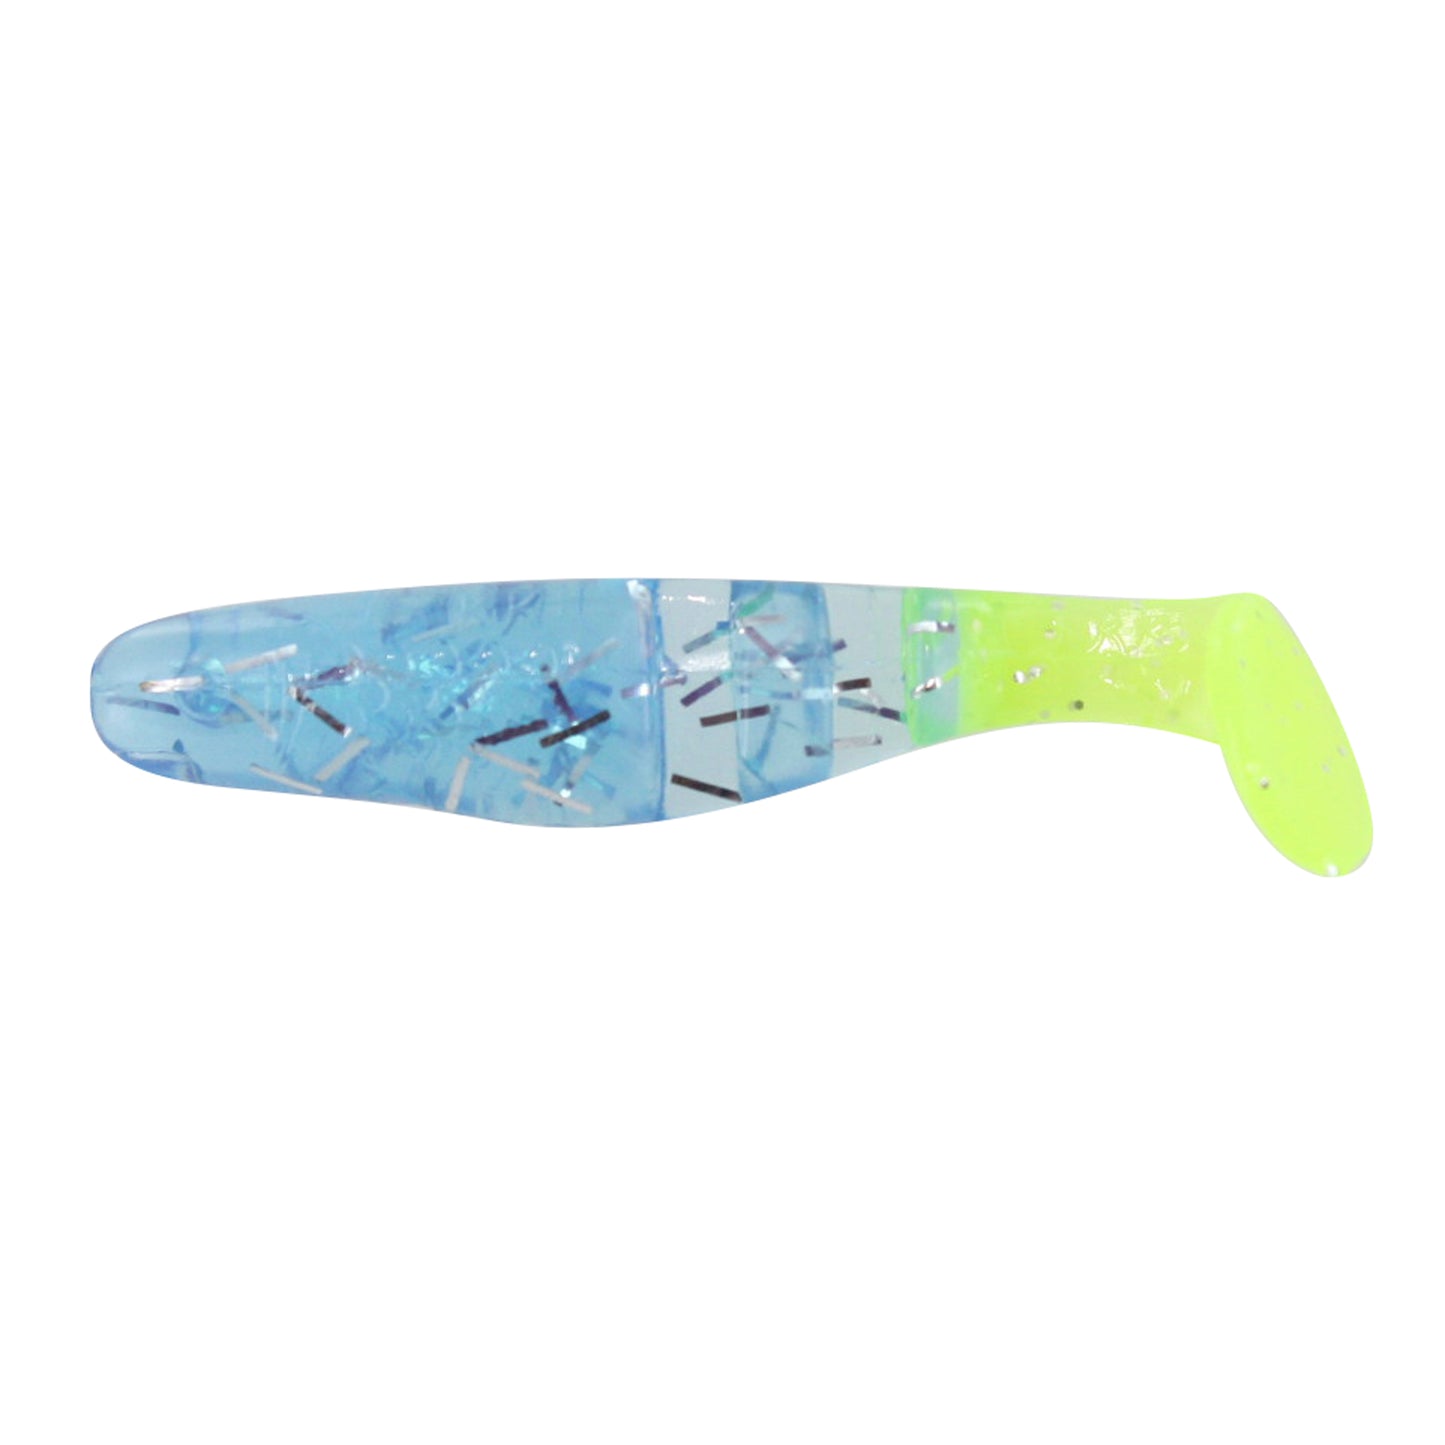 Charlie Brewers 2-1/8" Double Action Minnow 10/pk - Blue Ice / Chartreuse